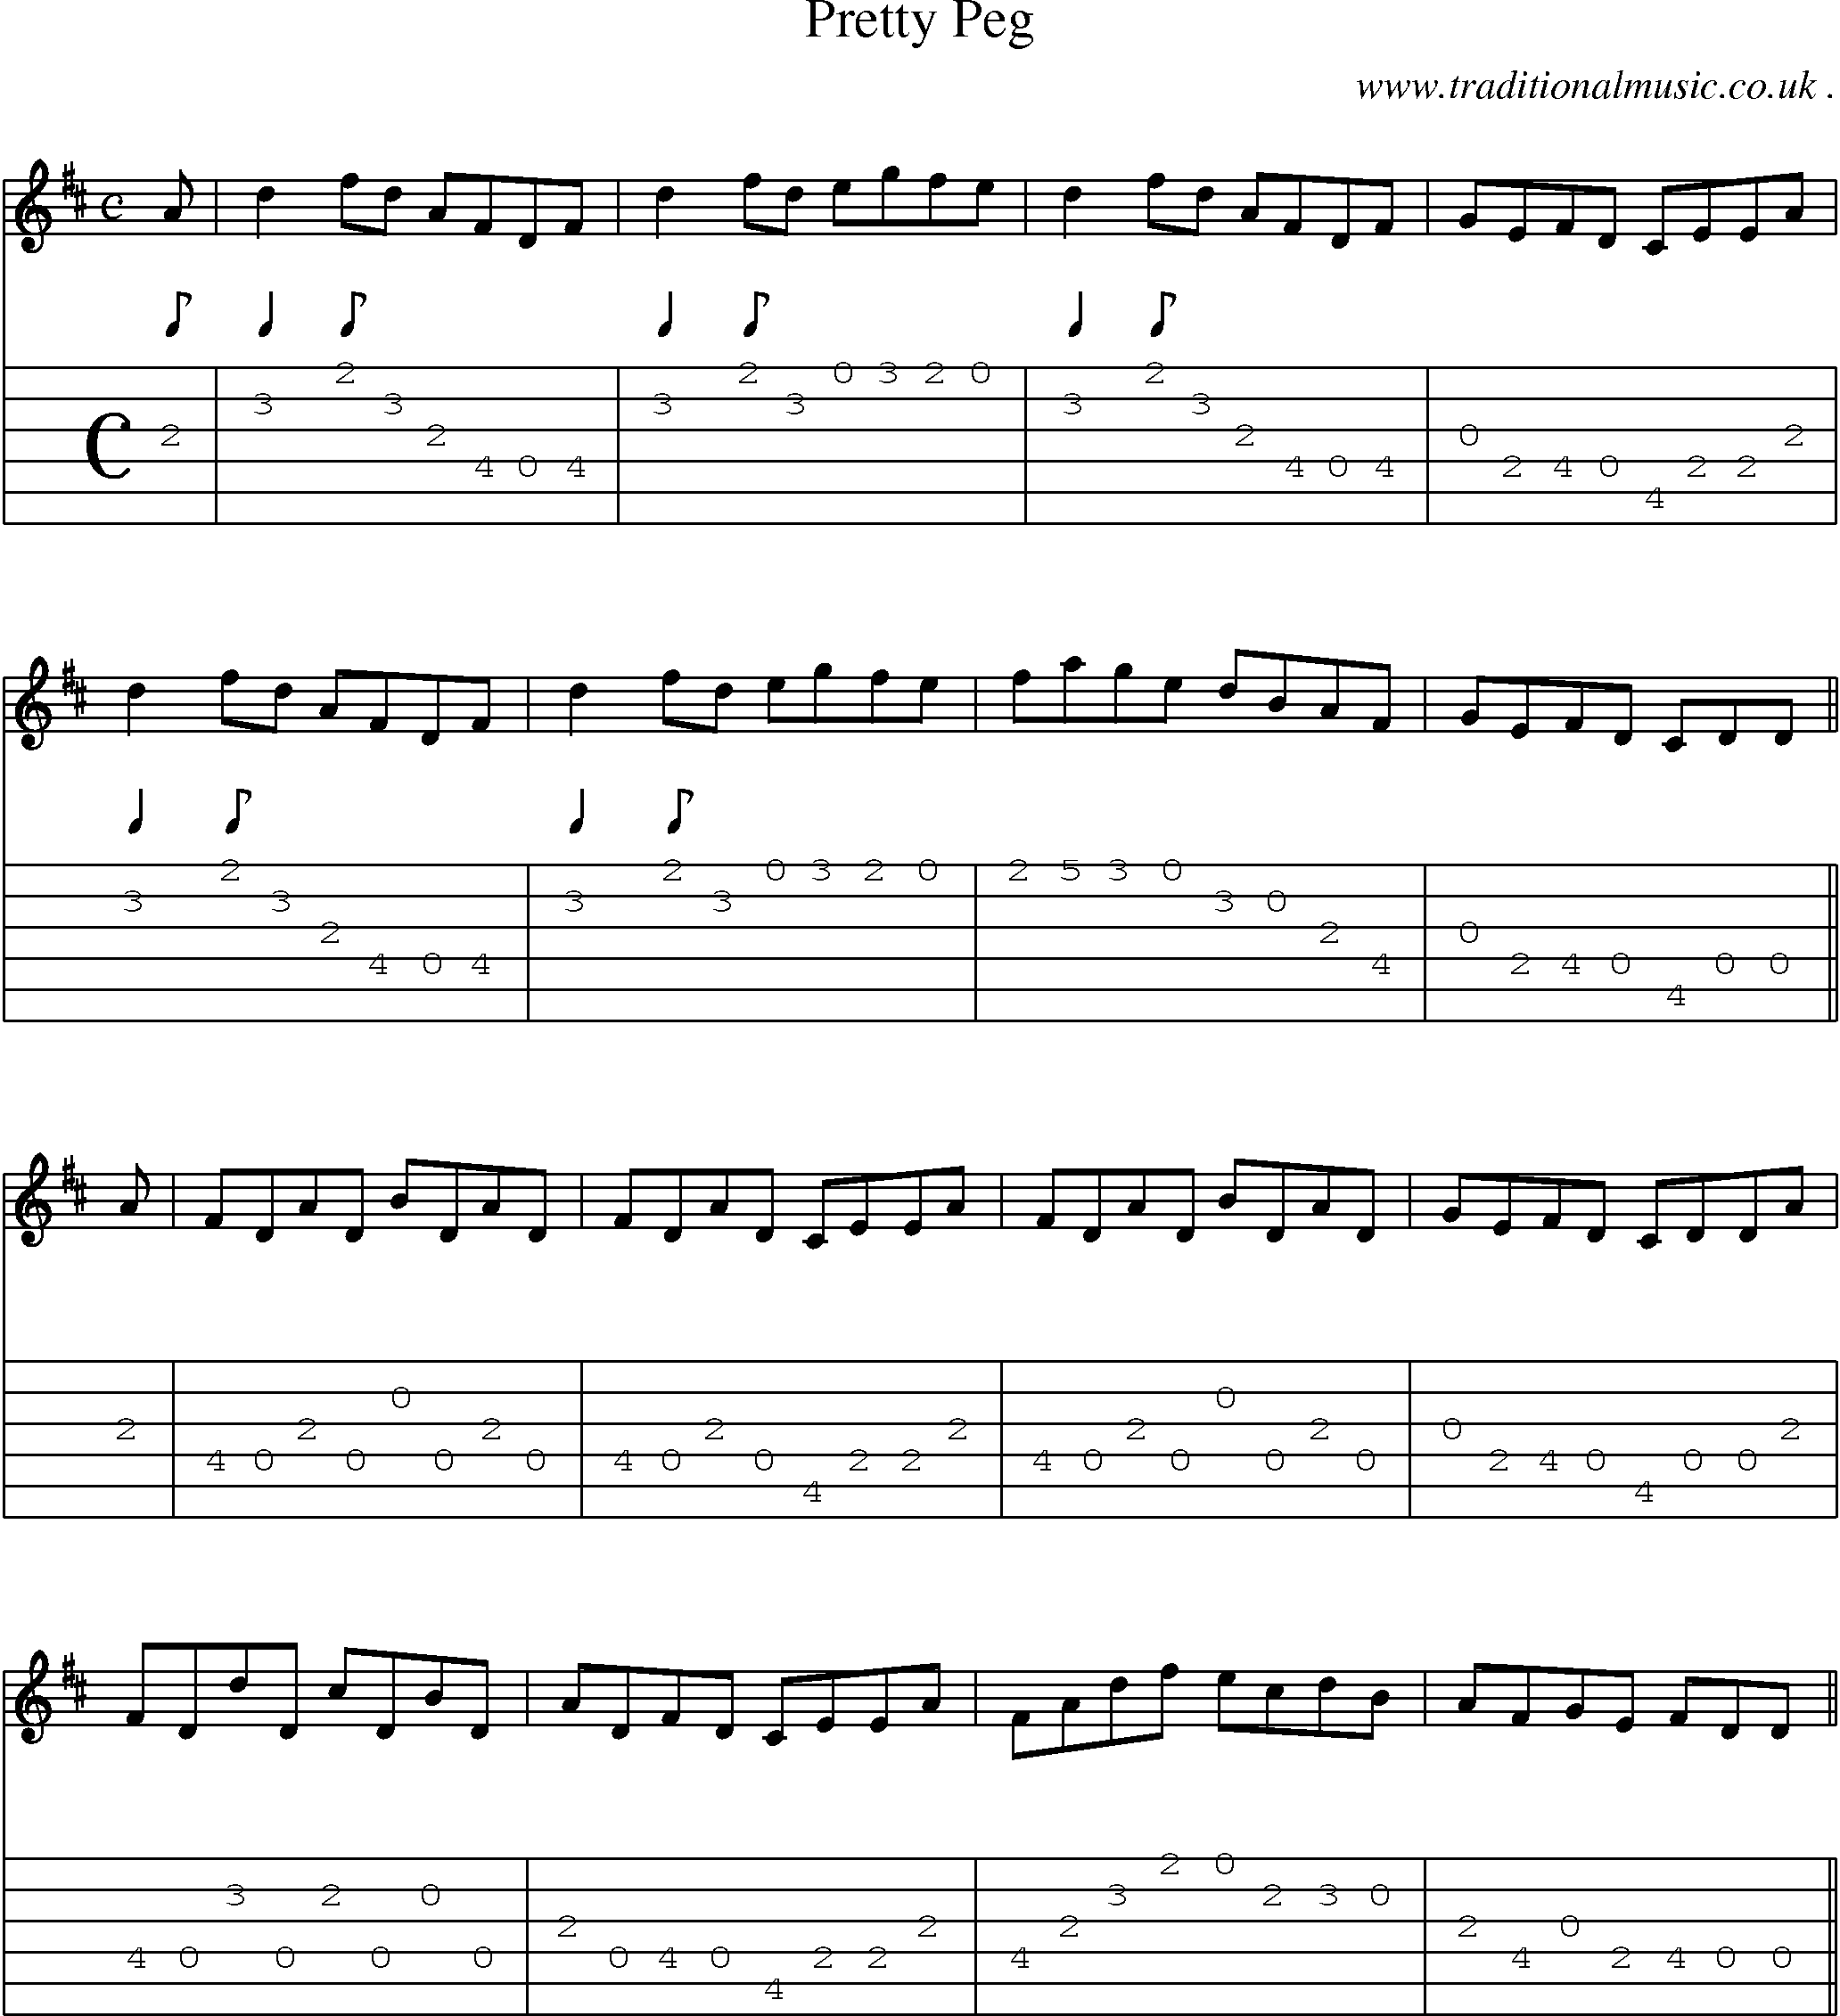 Sheet-Music and Guitar Tabs for Pretty Peg